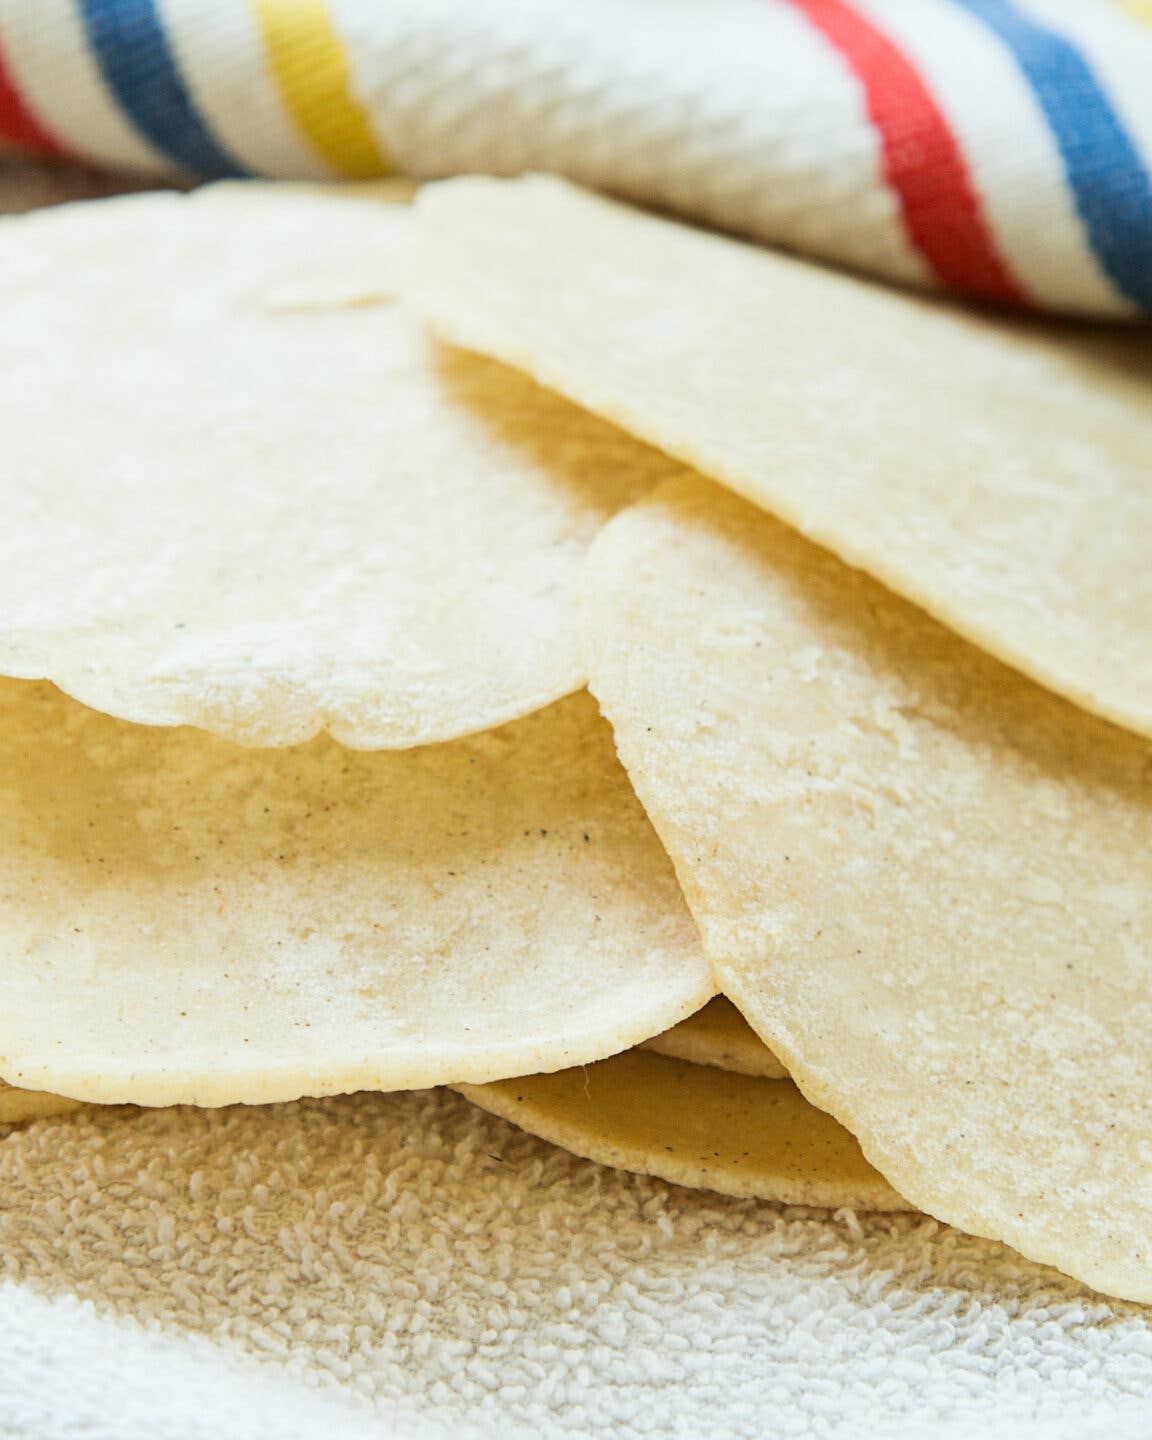 Video: How to Make Corn Tortillas from Scratch